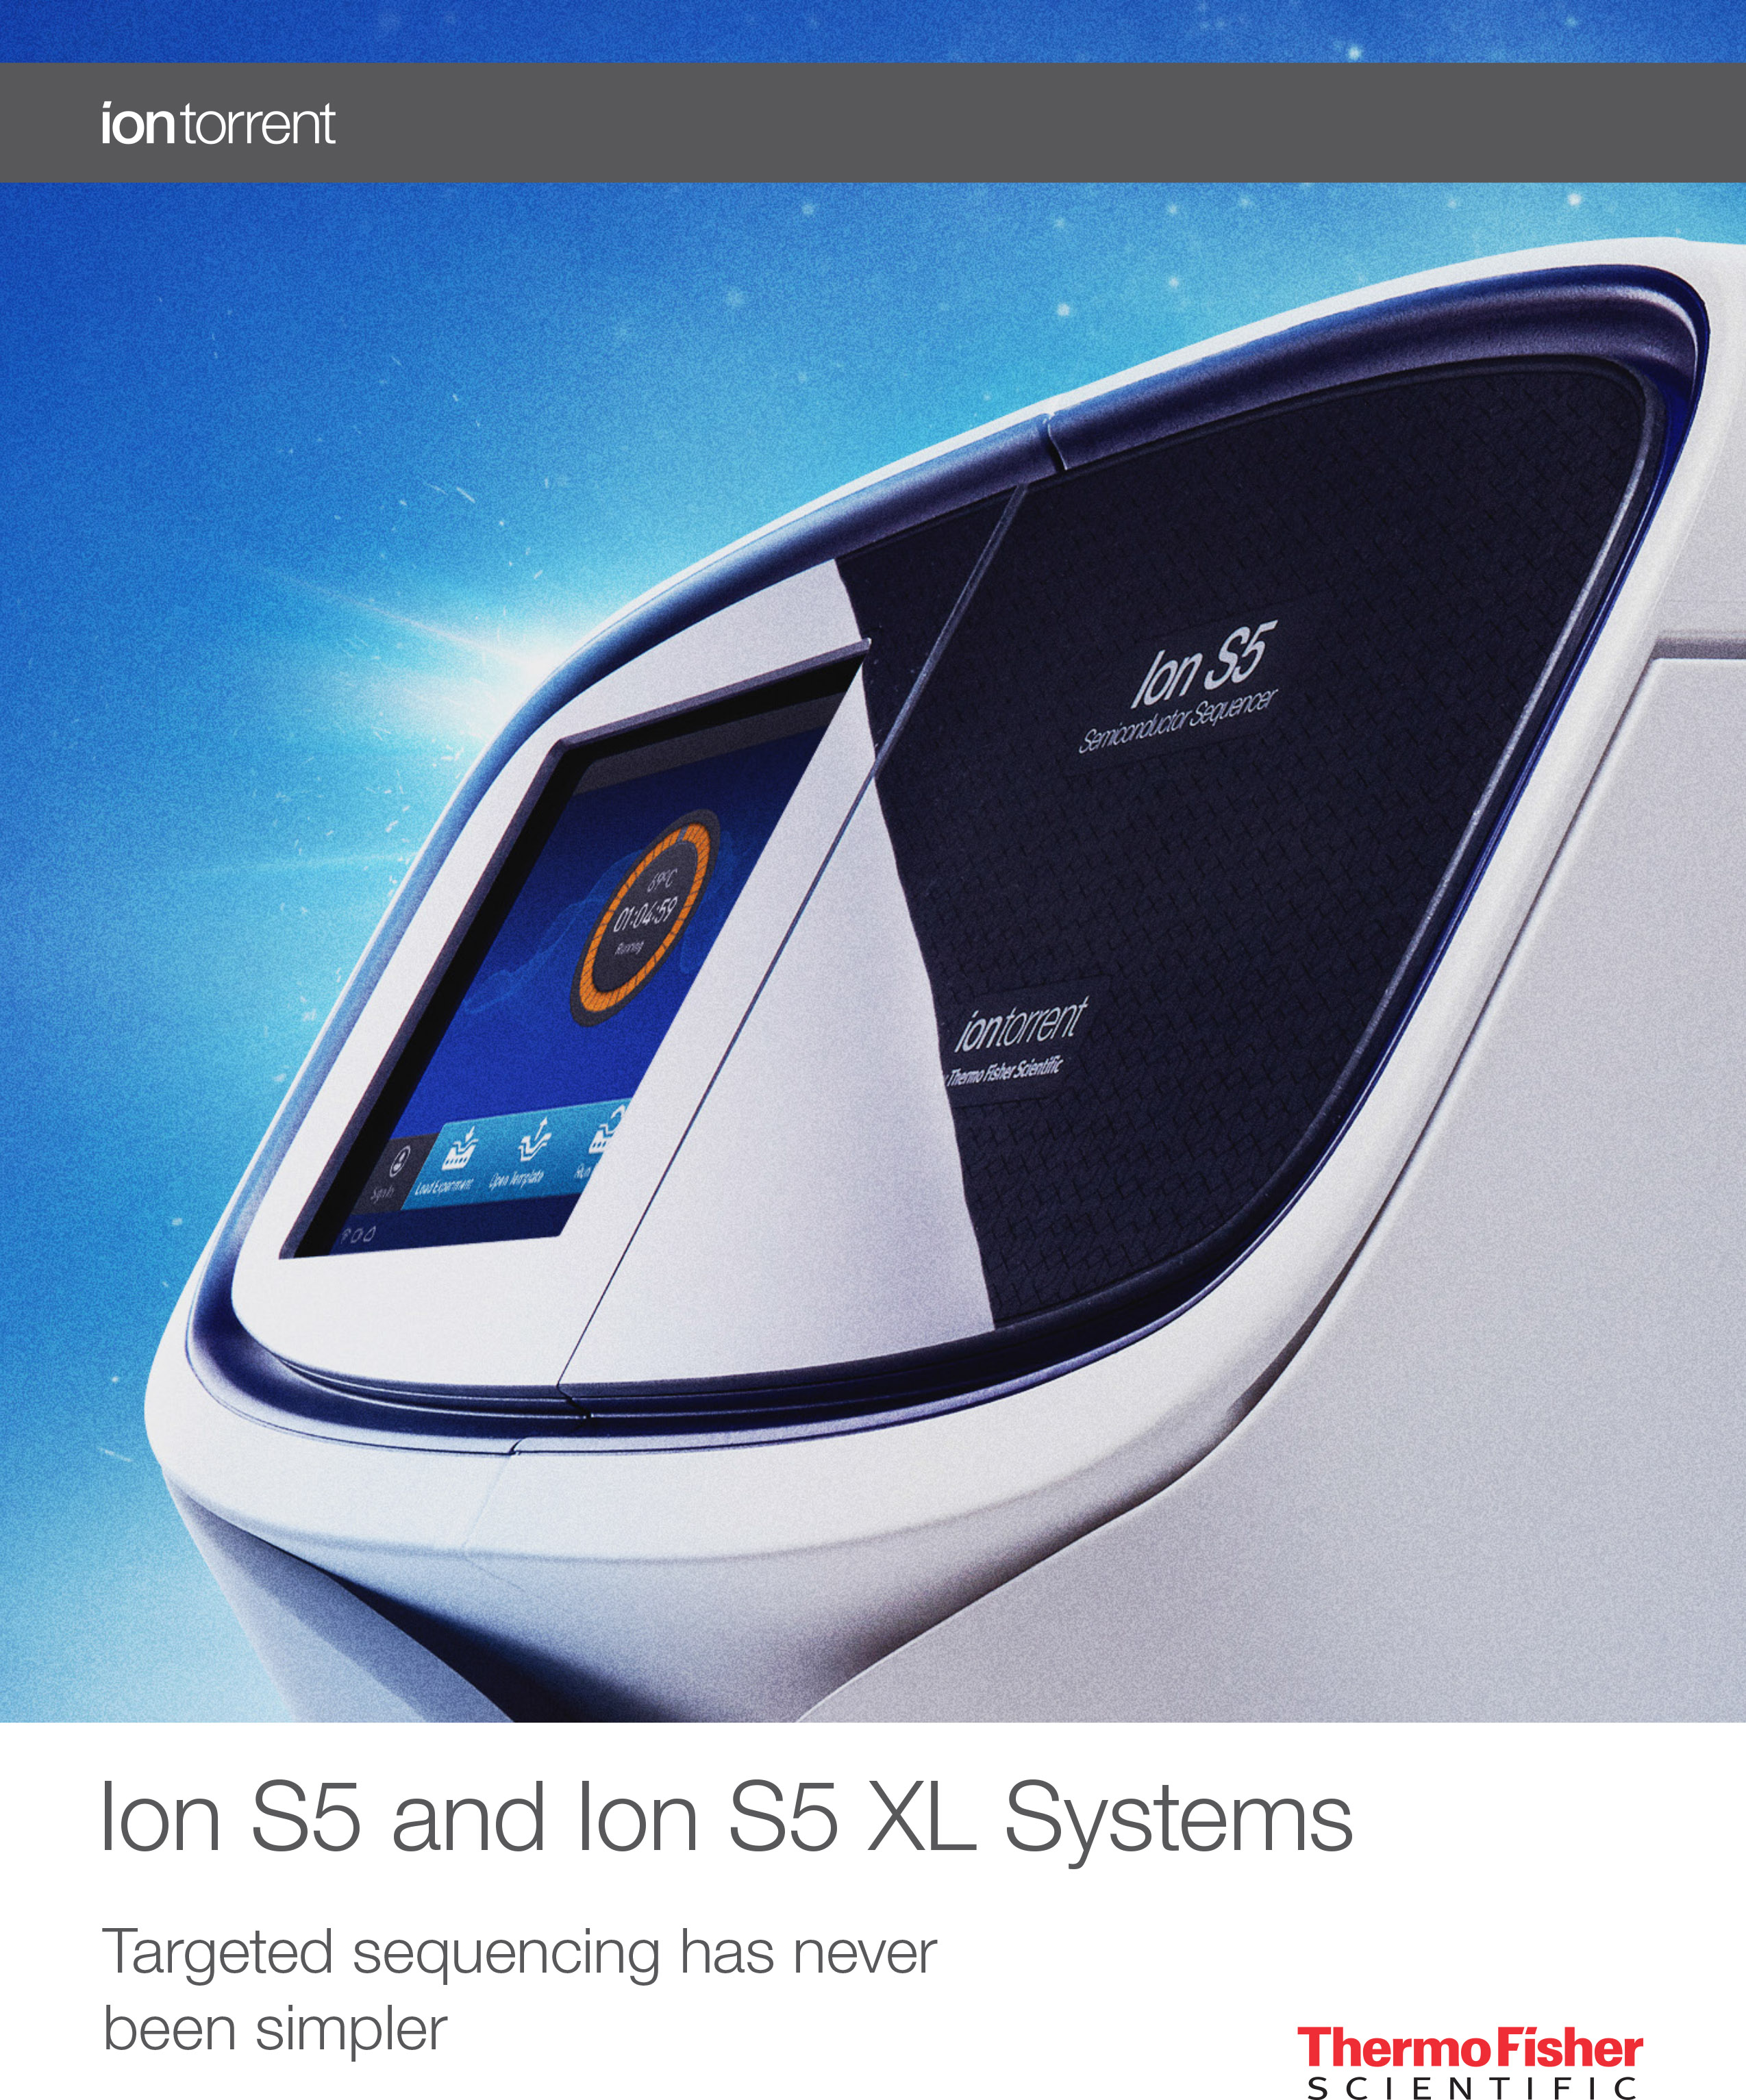 Ion S5 and Ion S5 XL Systems